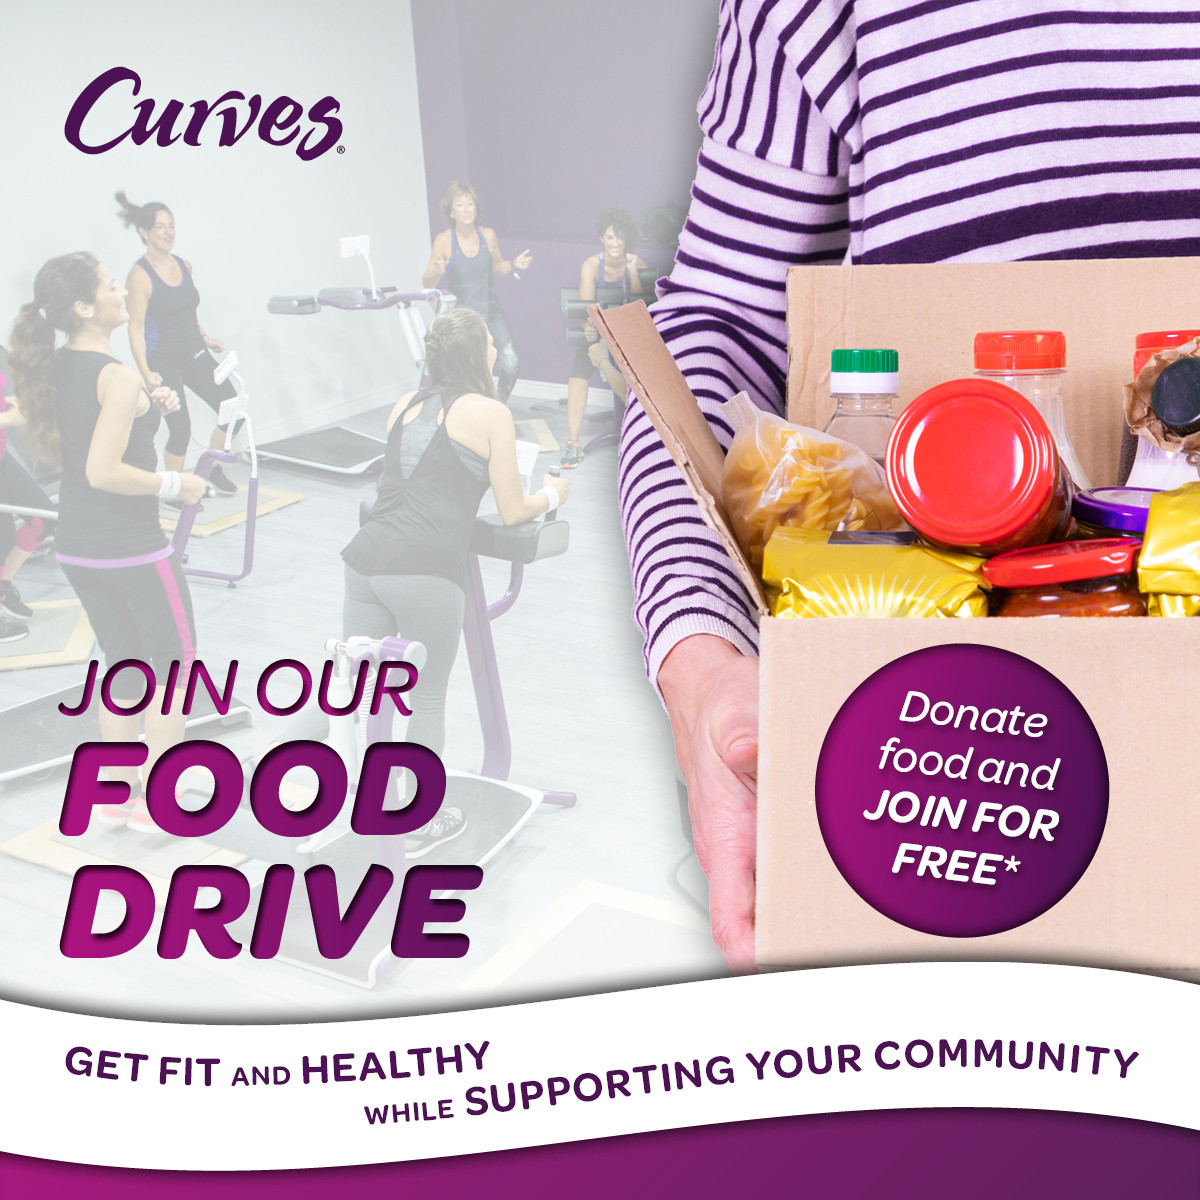 Curves clubs organise Food Drive to help local community